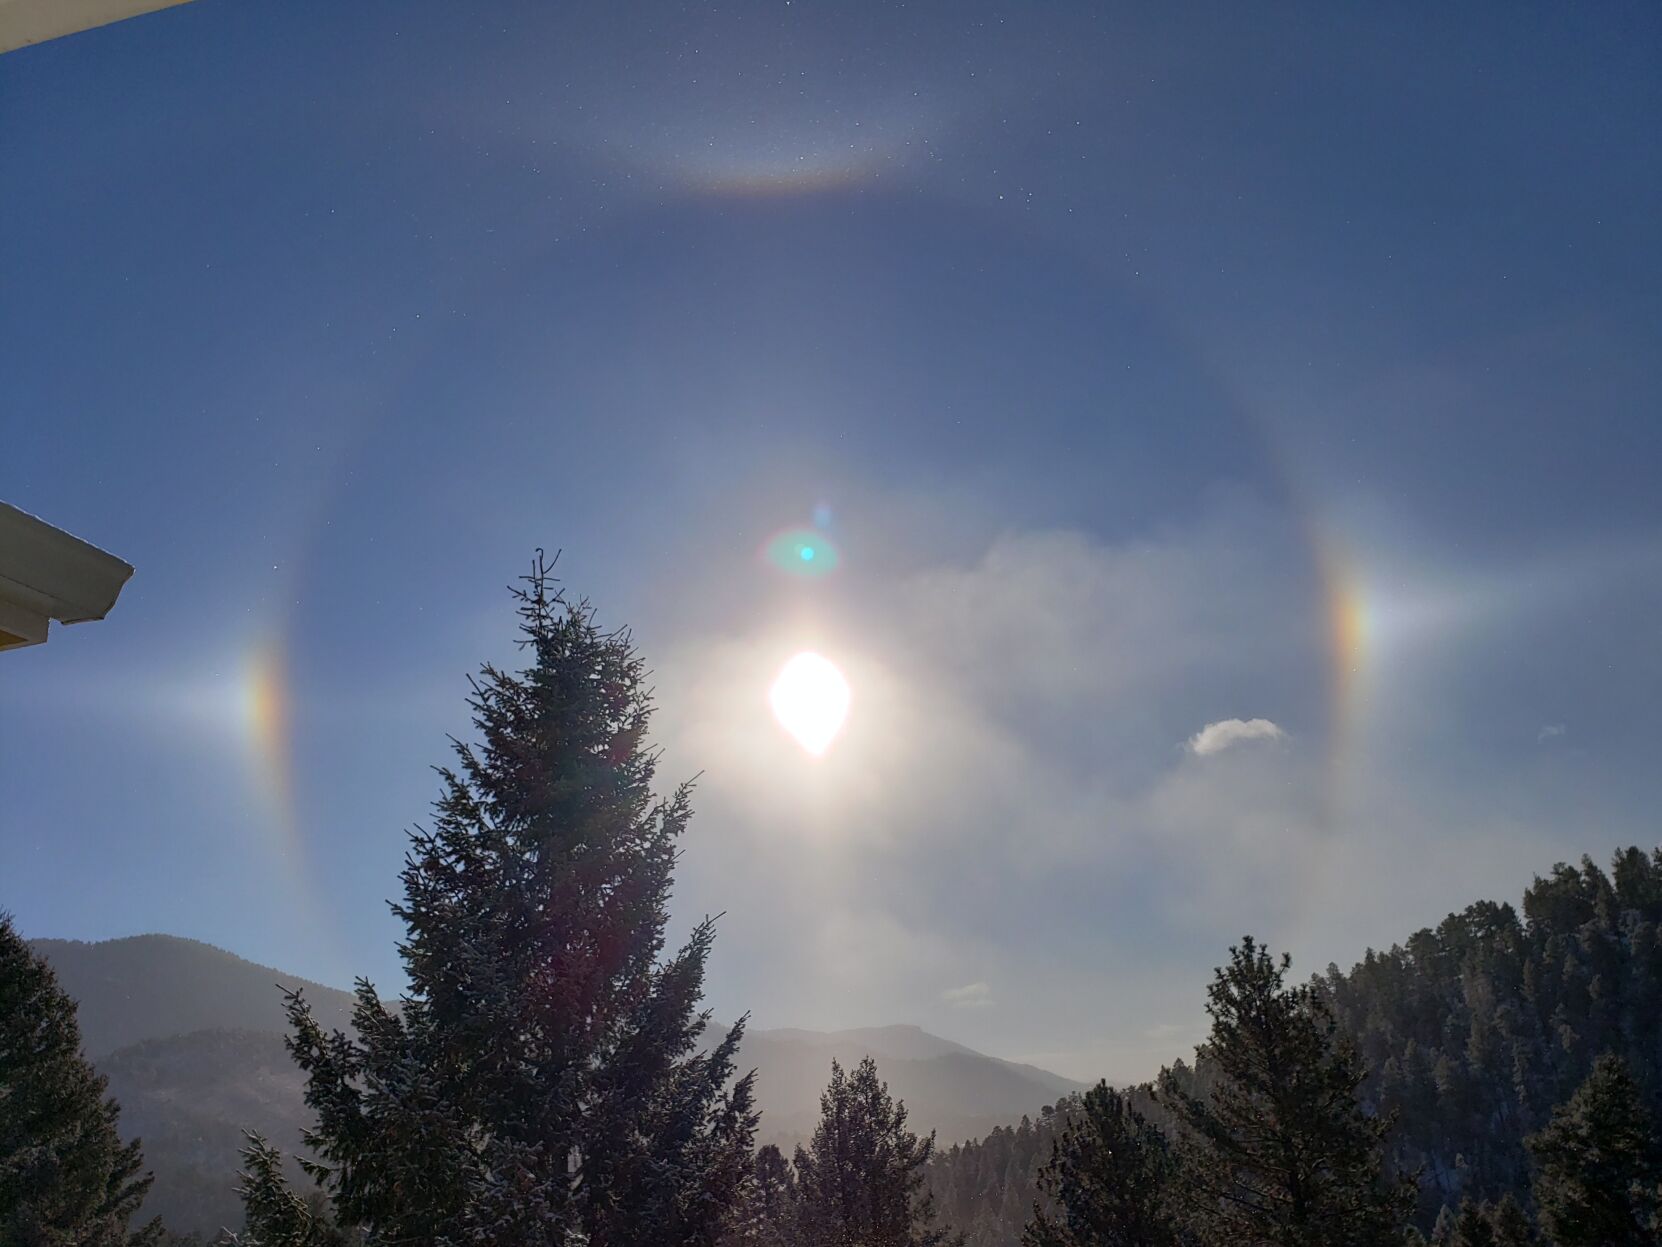 Weather 101: What causes a halo around the sun?